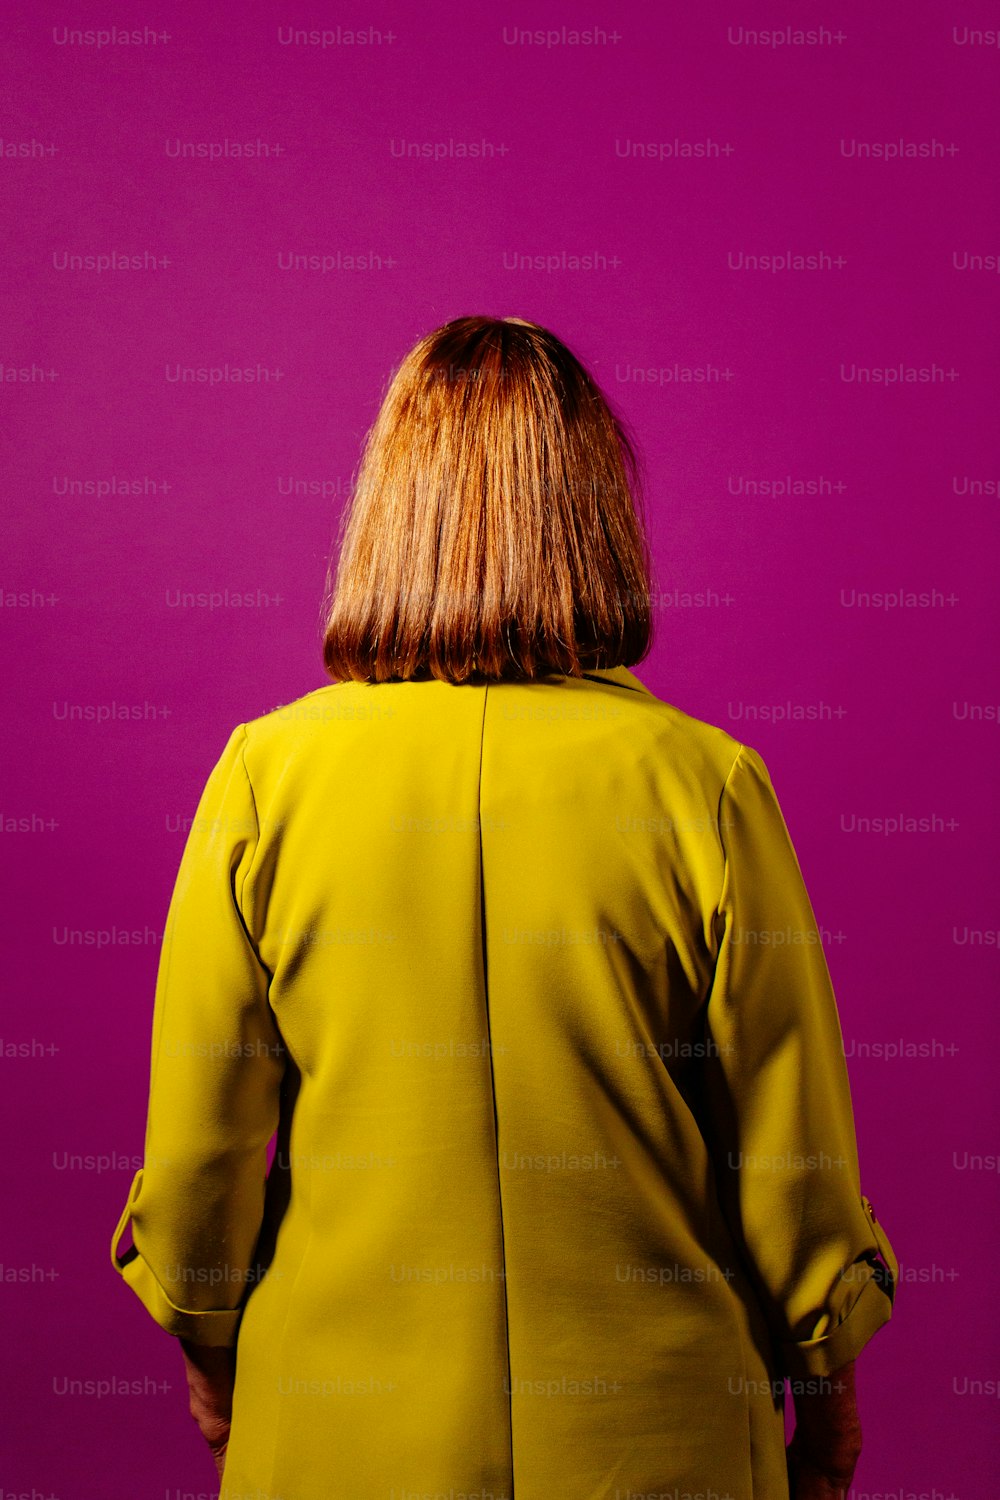 the back of a woman's yellow jacket against a purple background